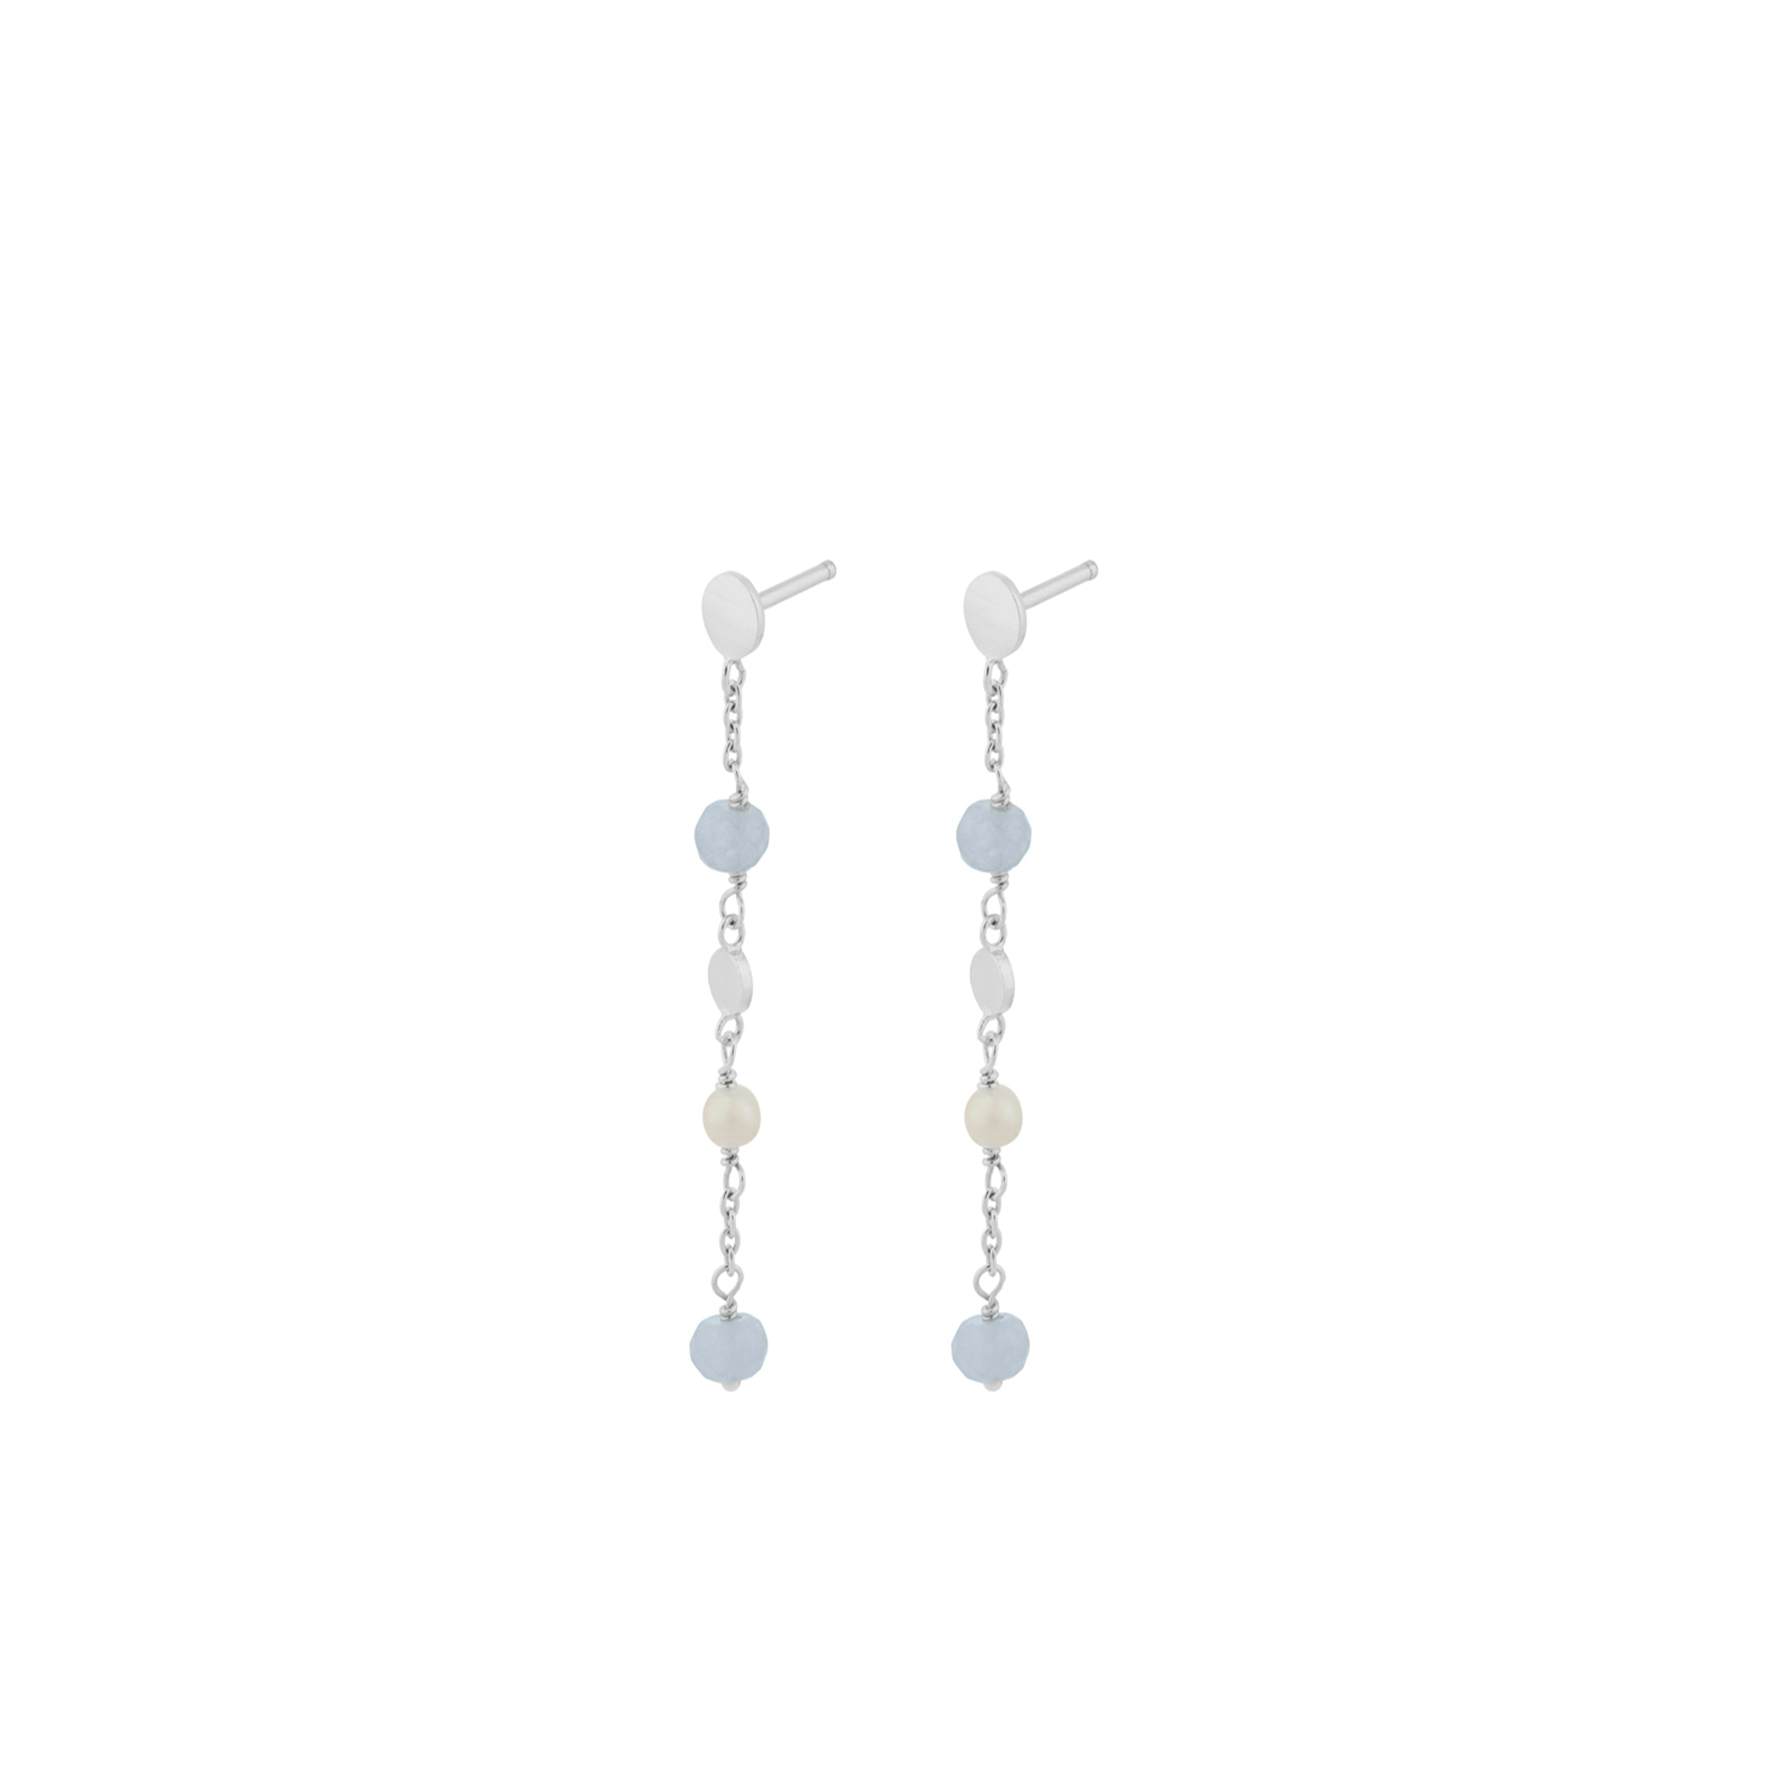 Afterglow Sea Earchains from Pernille Corydon in Silver Sterling 925